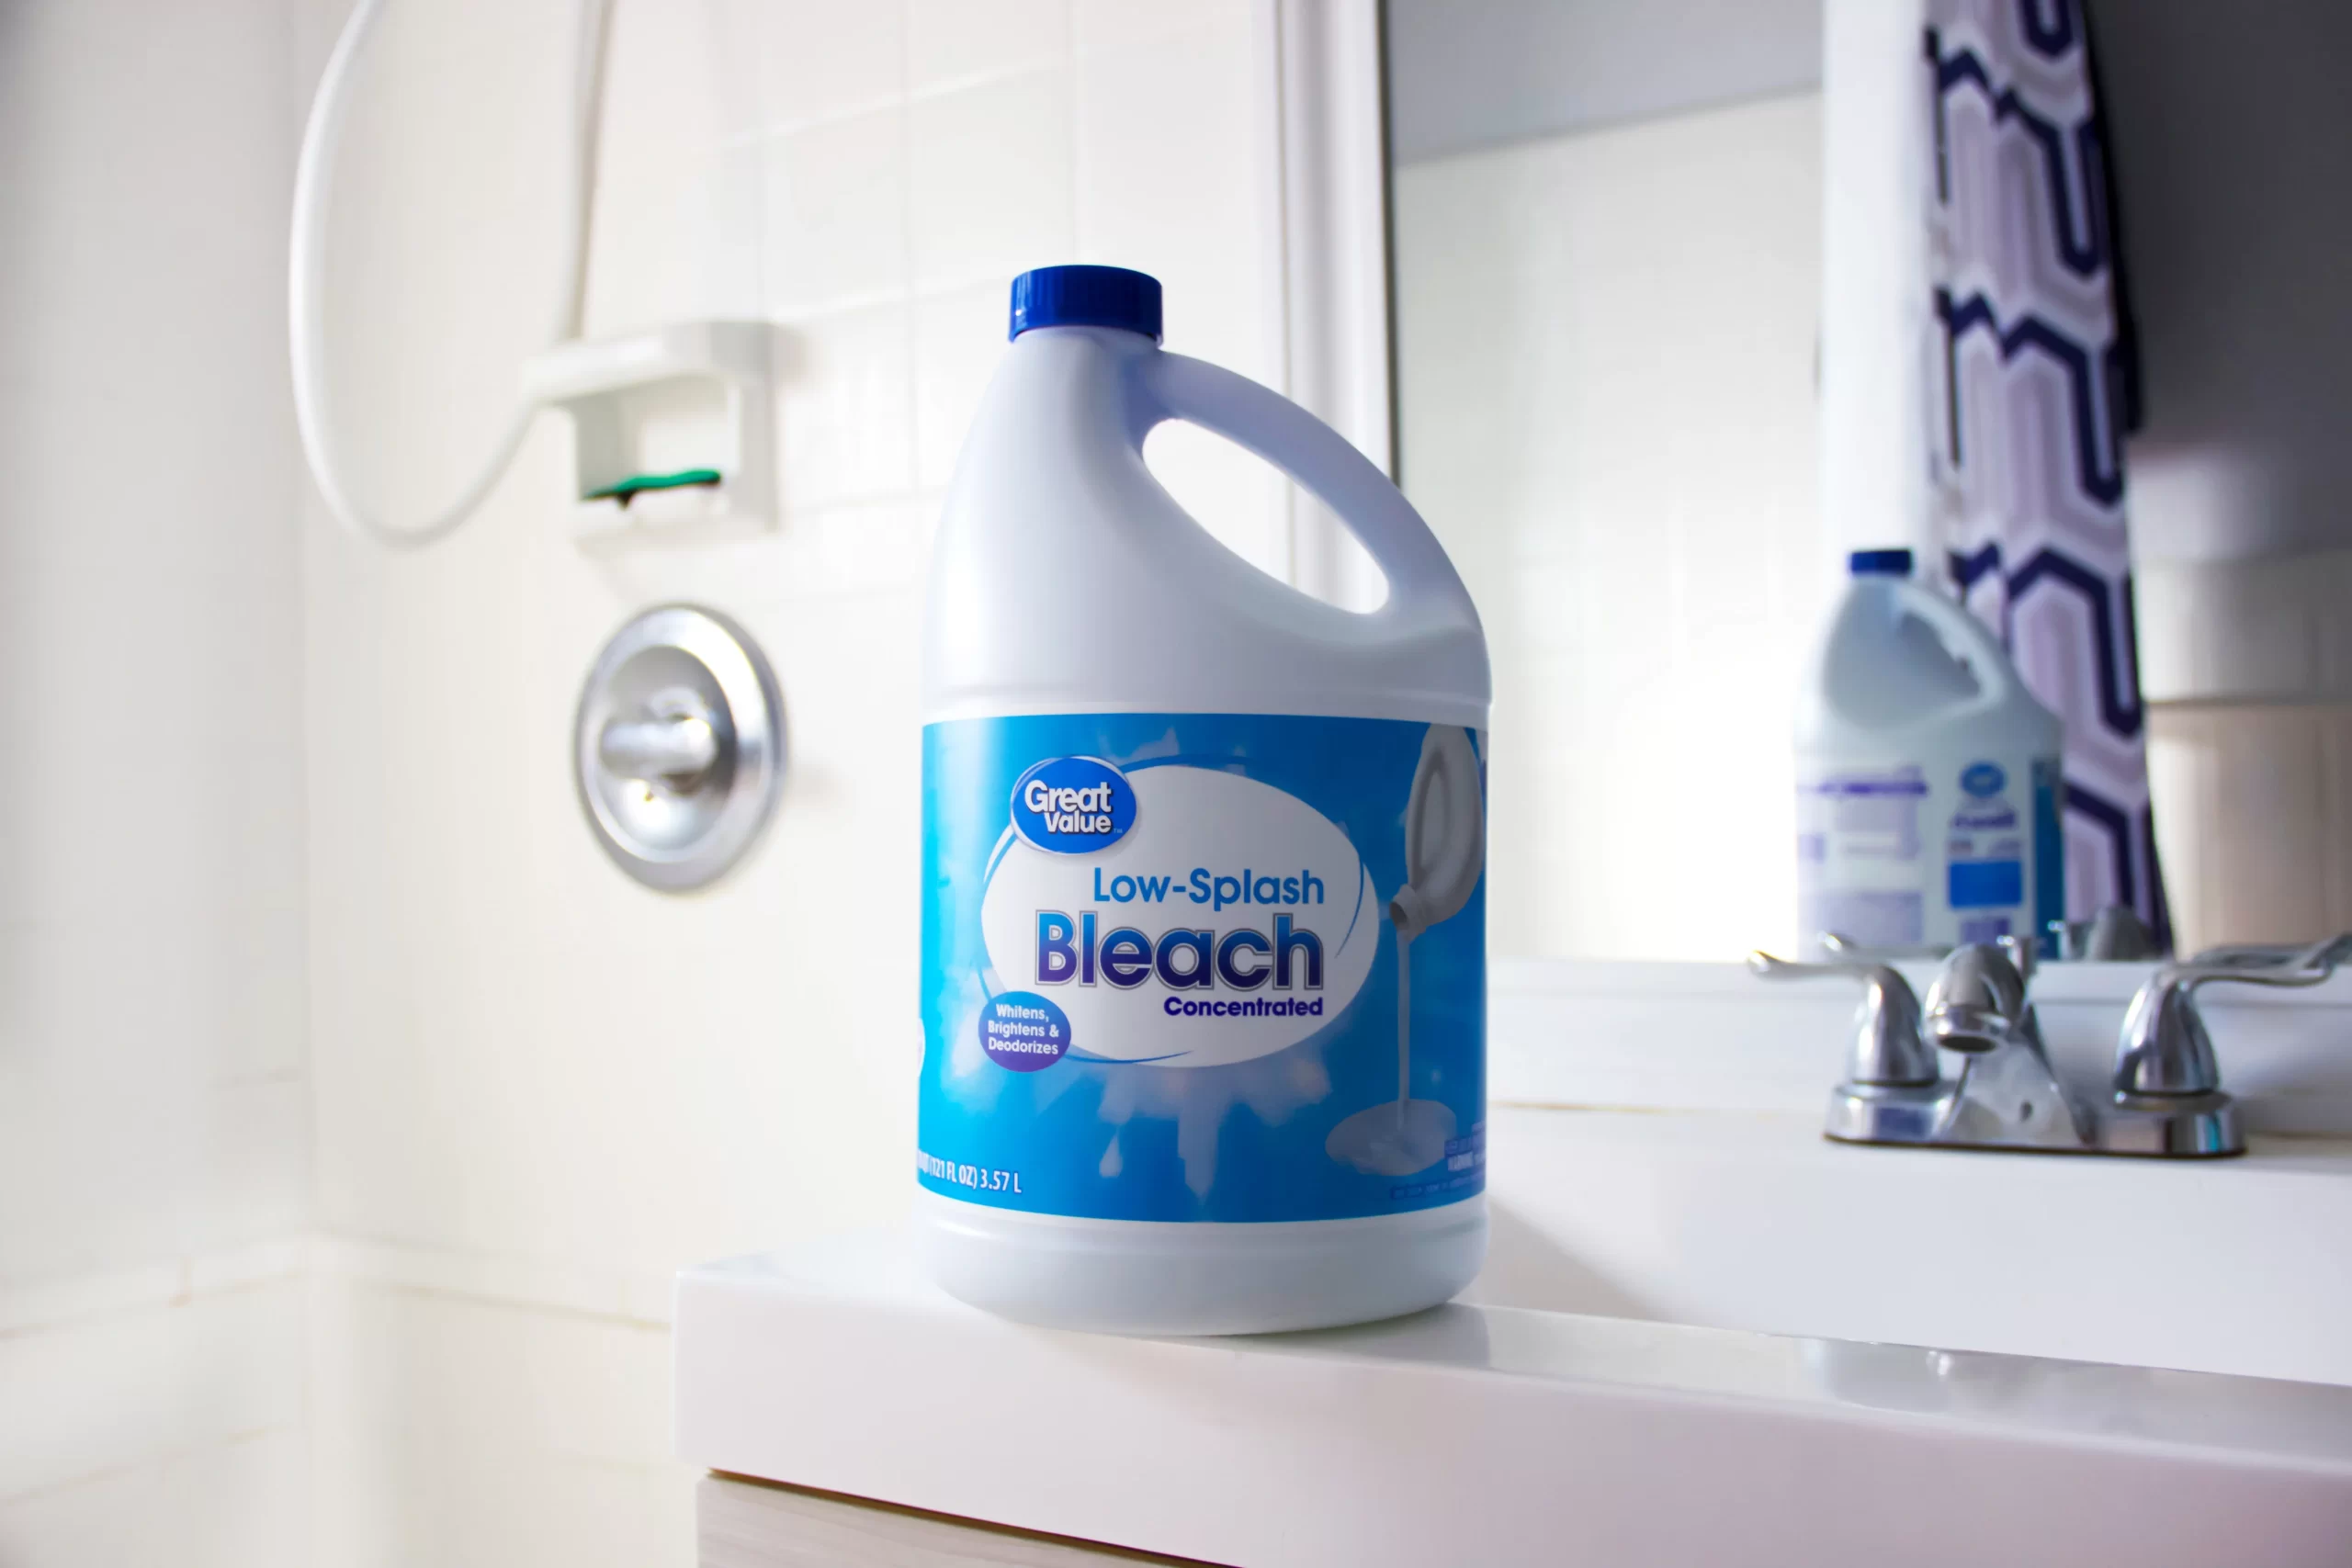 Why Is Bleach So Expensive? 13 Reasons